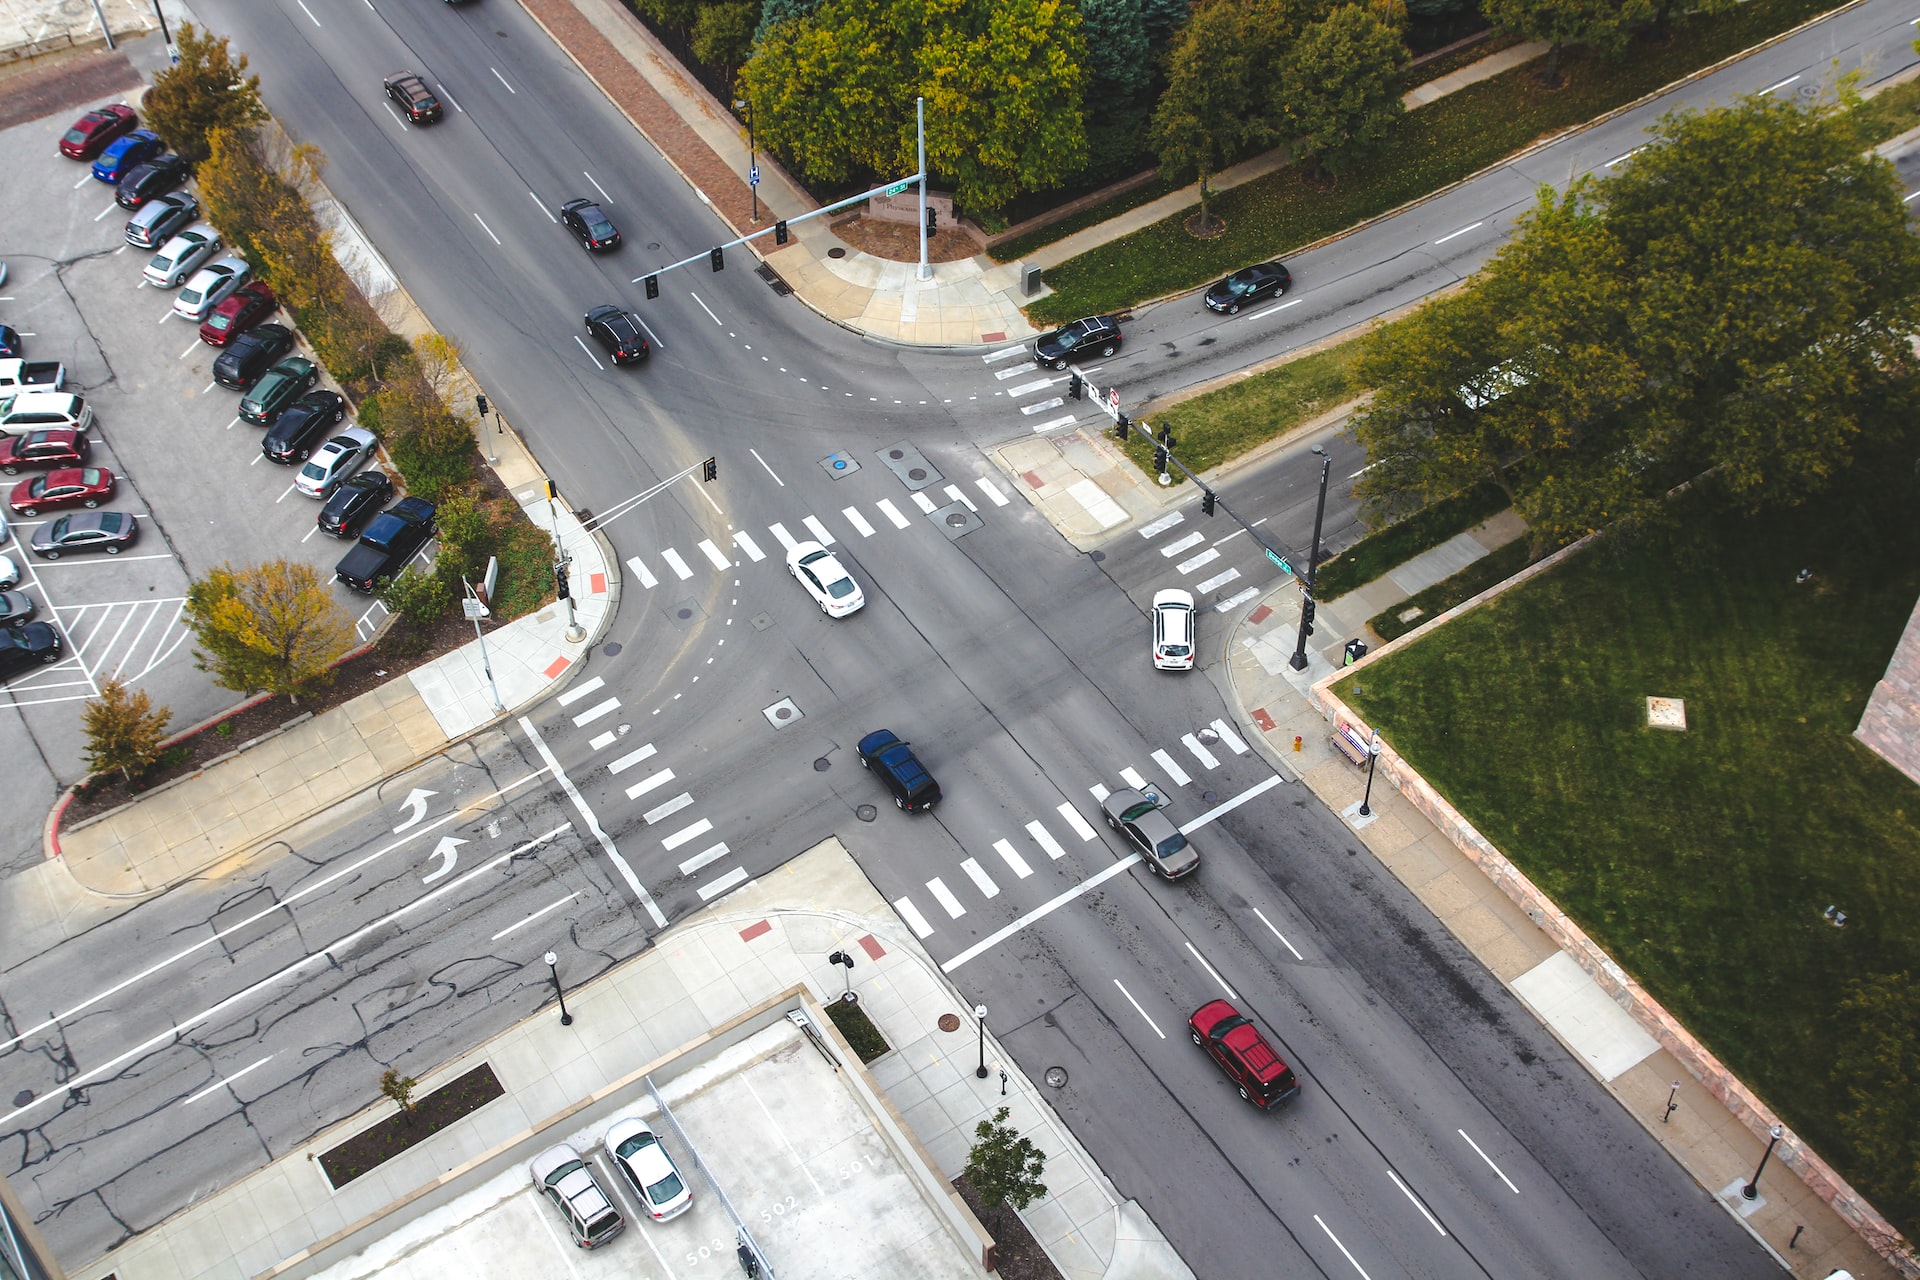 Bird’s-eye view of cars crossing an intersection next to a park with trees